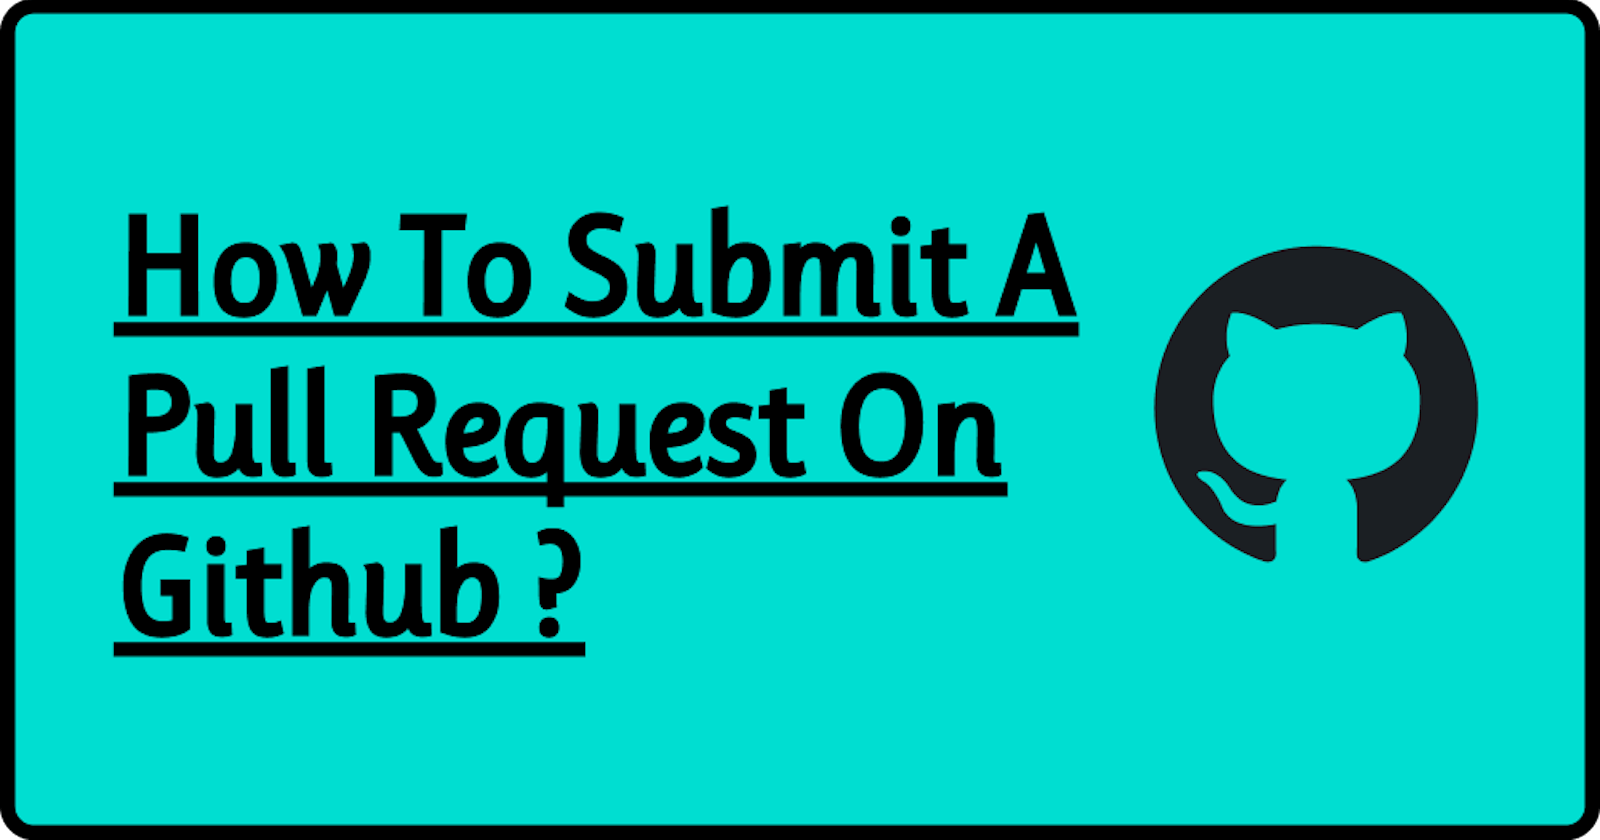 How To Submit A Pull Request On Github ?